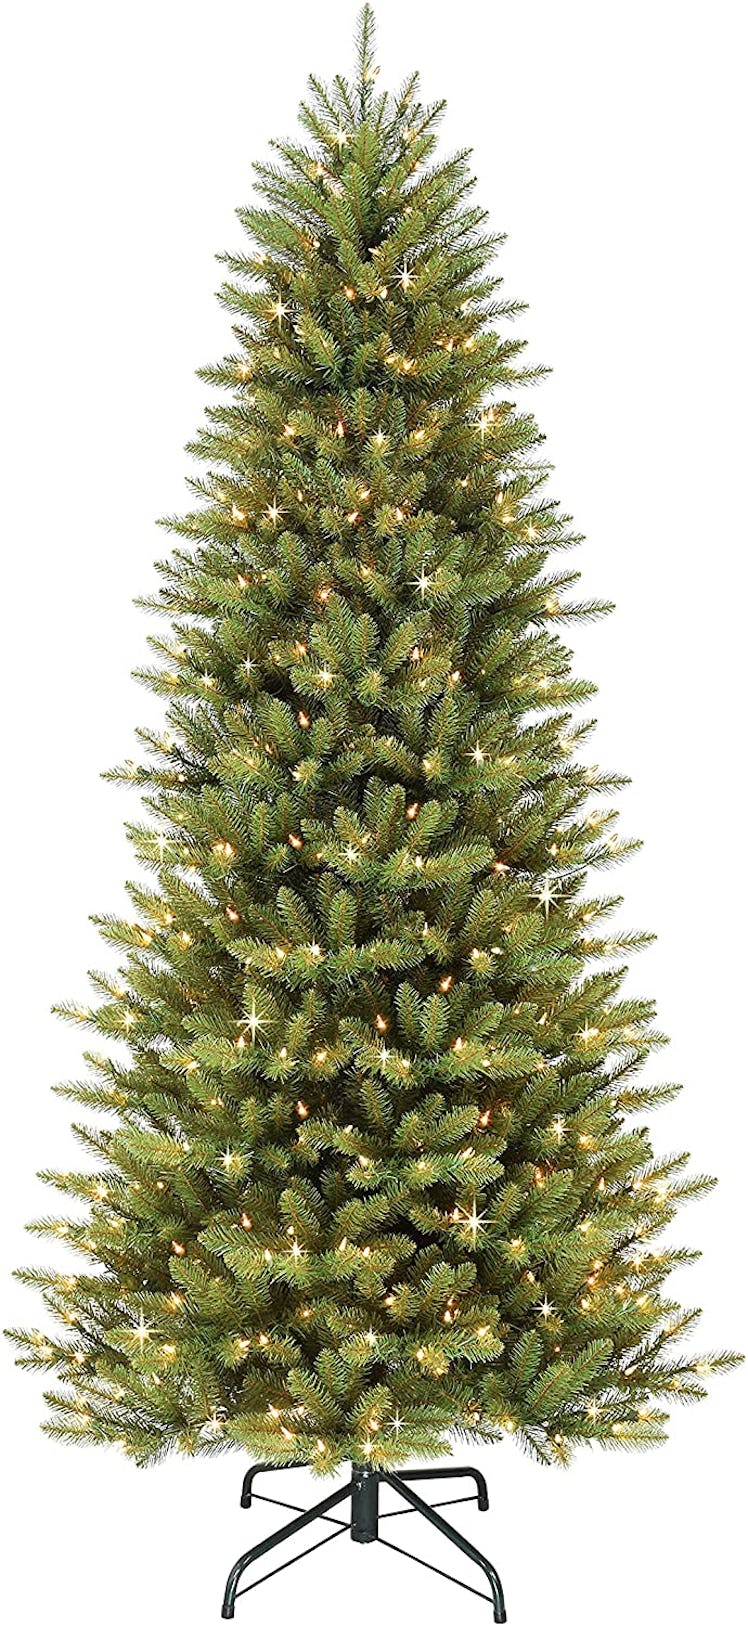 Check out this list of Christmas tree Black Friday deals.